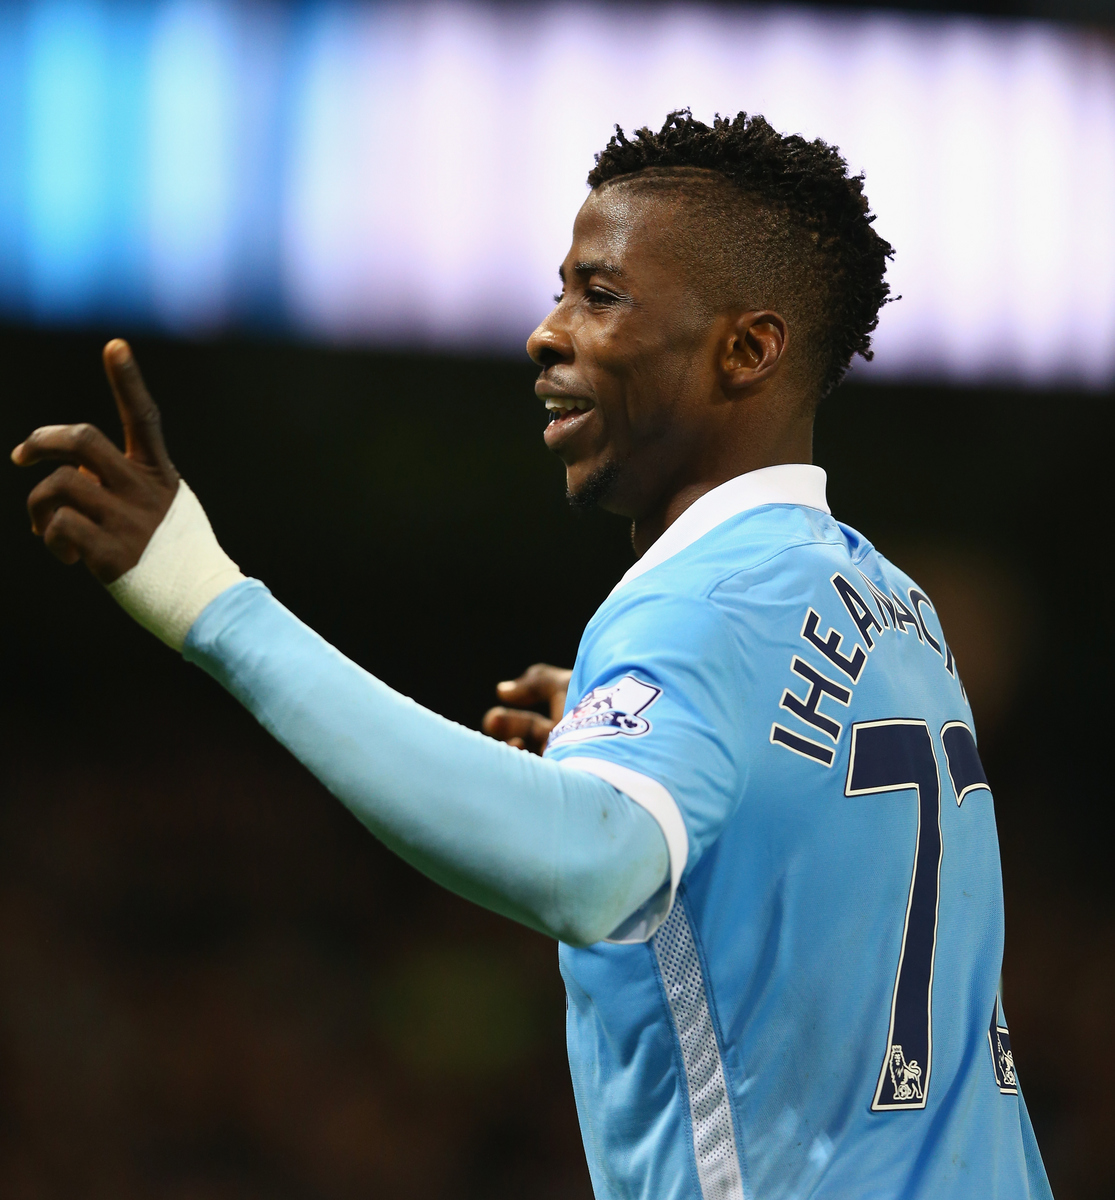 kelechi iheanacho,jogador,manchester city,equipa,crystal palace,capital one cup 2015/16,league cup